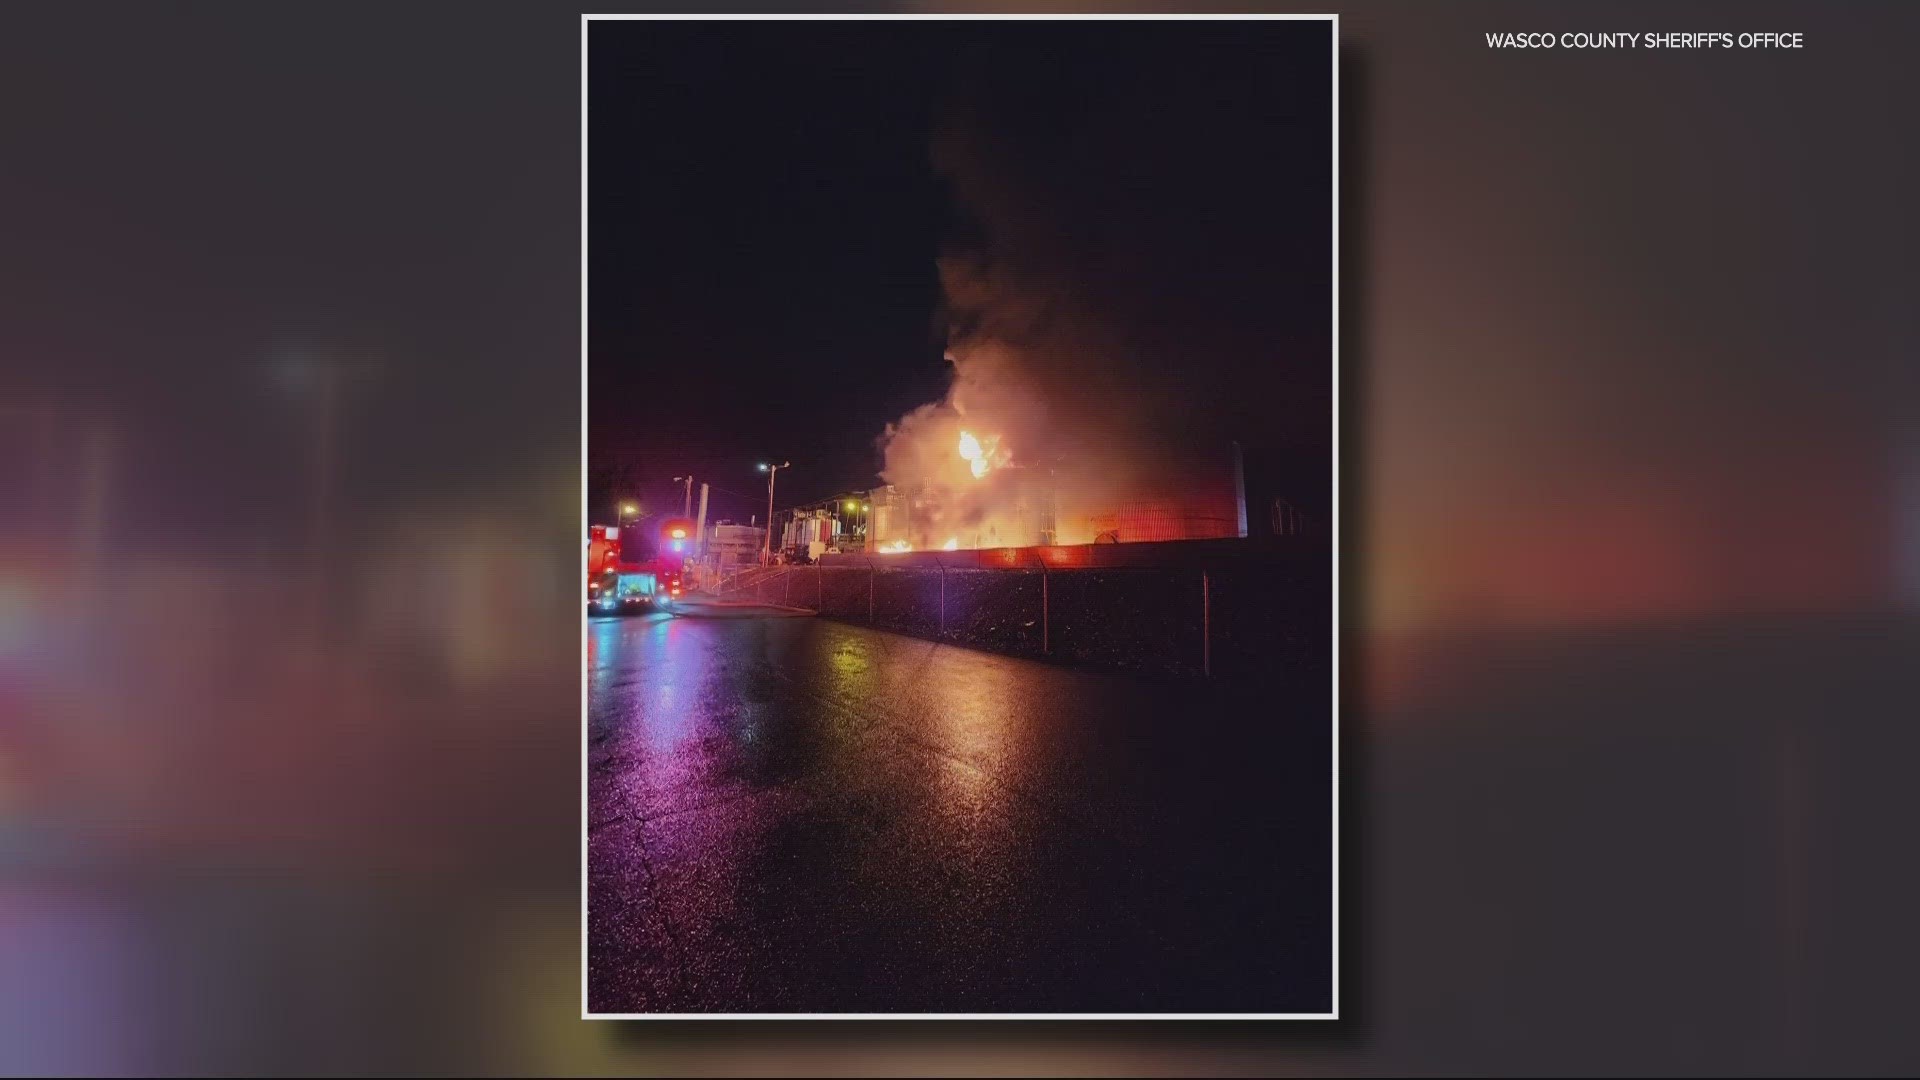 The two firefighters were responding to an explosion at the AmeriTies West plant in the Dalles, according to the Wasco County Sheriff's Office.